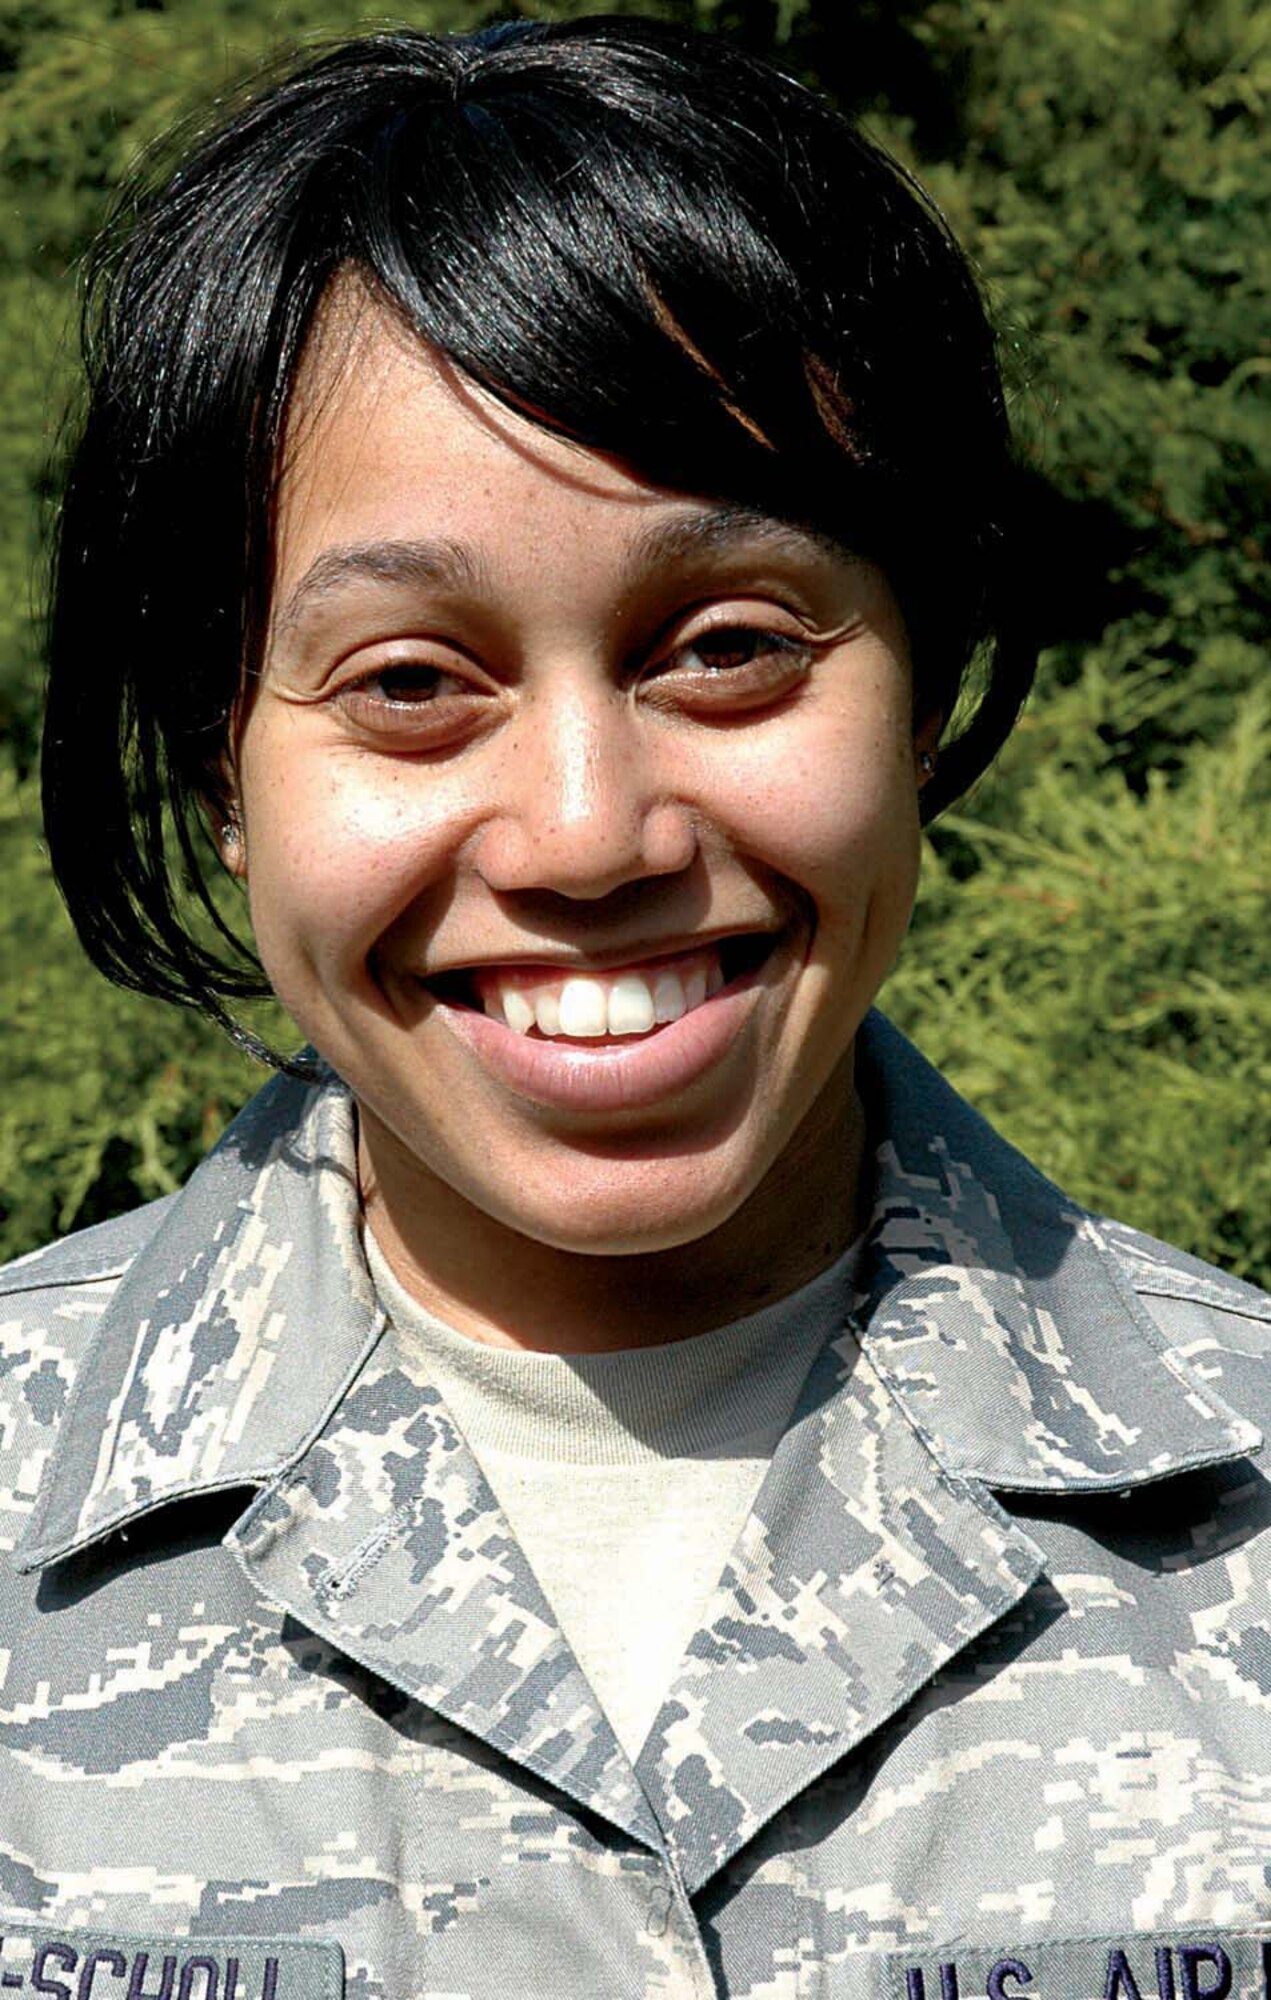 Staff Sgt. Channel Bolton-Scholl of the 446th Maintenance Squadron, McChord Air Force Base, Wash., is one of 12 Air Force Outstanding Airmen of the Year. She earned this honor based on her contributions to the mission, display of leadership and dedication in the Air Force Reserve. Sergeant Bolton-Scholl joined the Air Force Reserve in March 2005. (U.S. Air Force photo/Airman 1st Class Patrick Cabello)